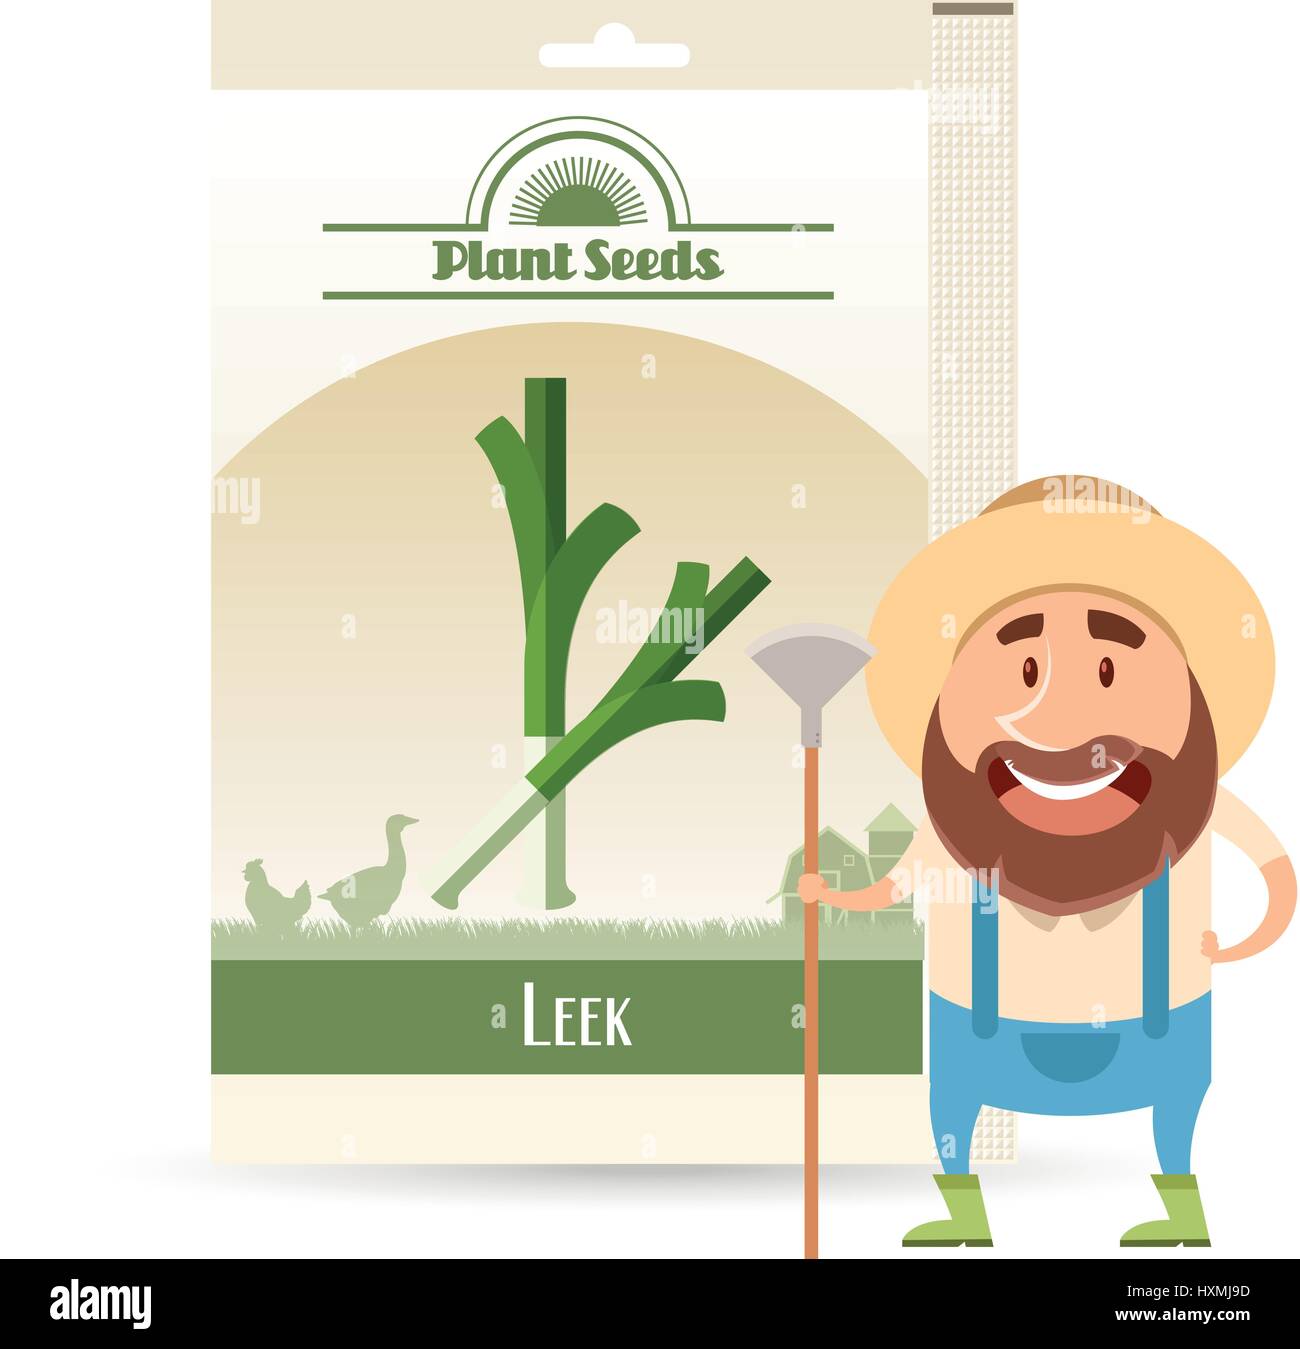 Pack of Leek seeds icon Stock Vector